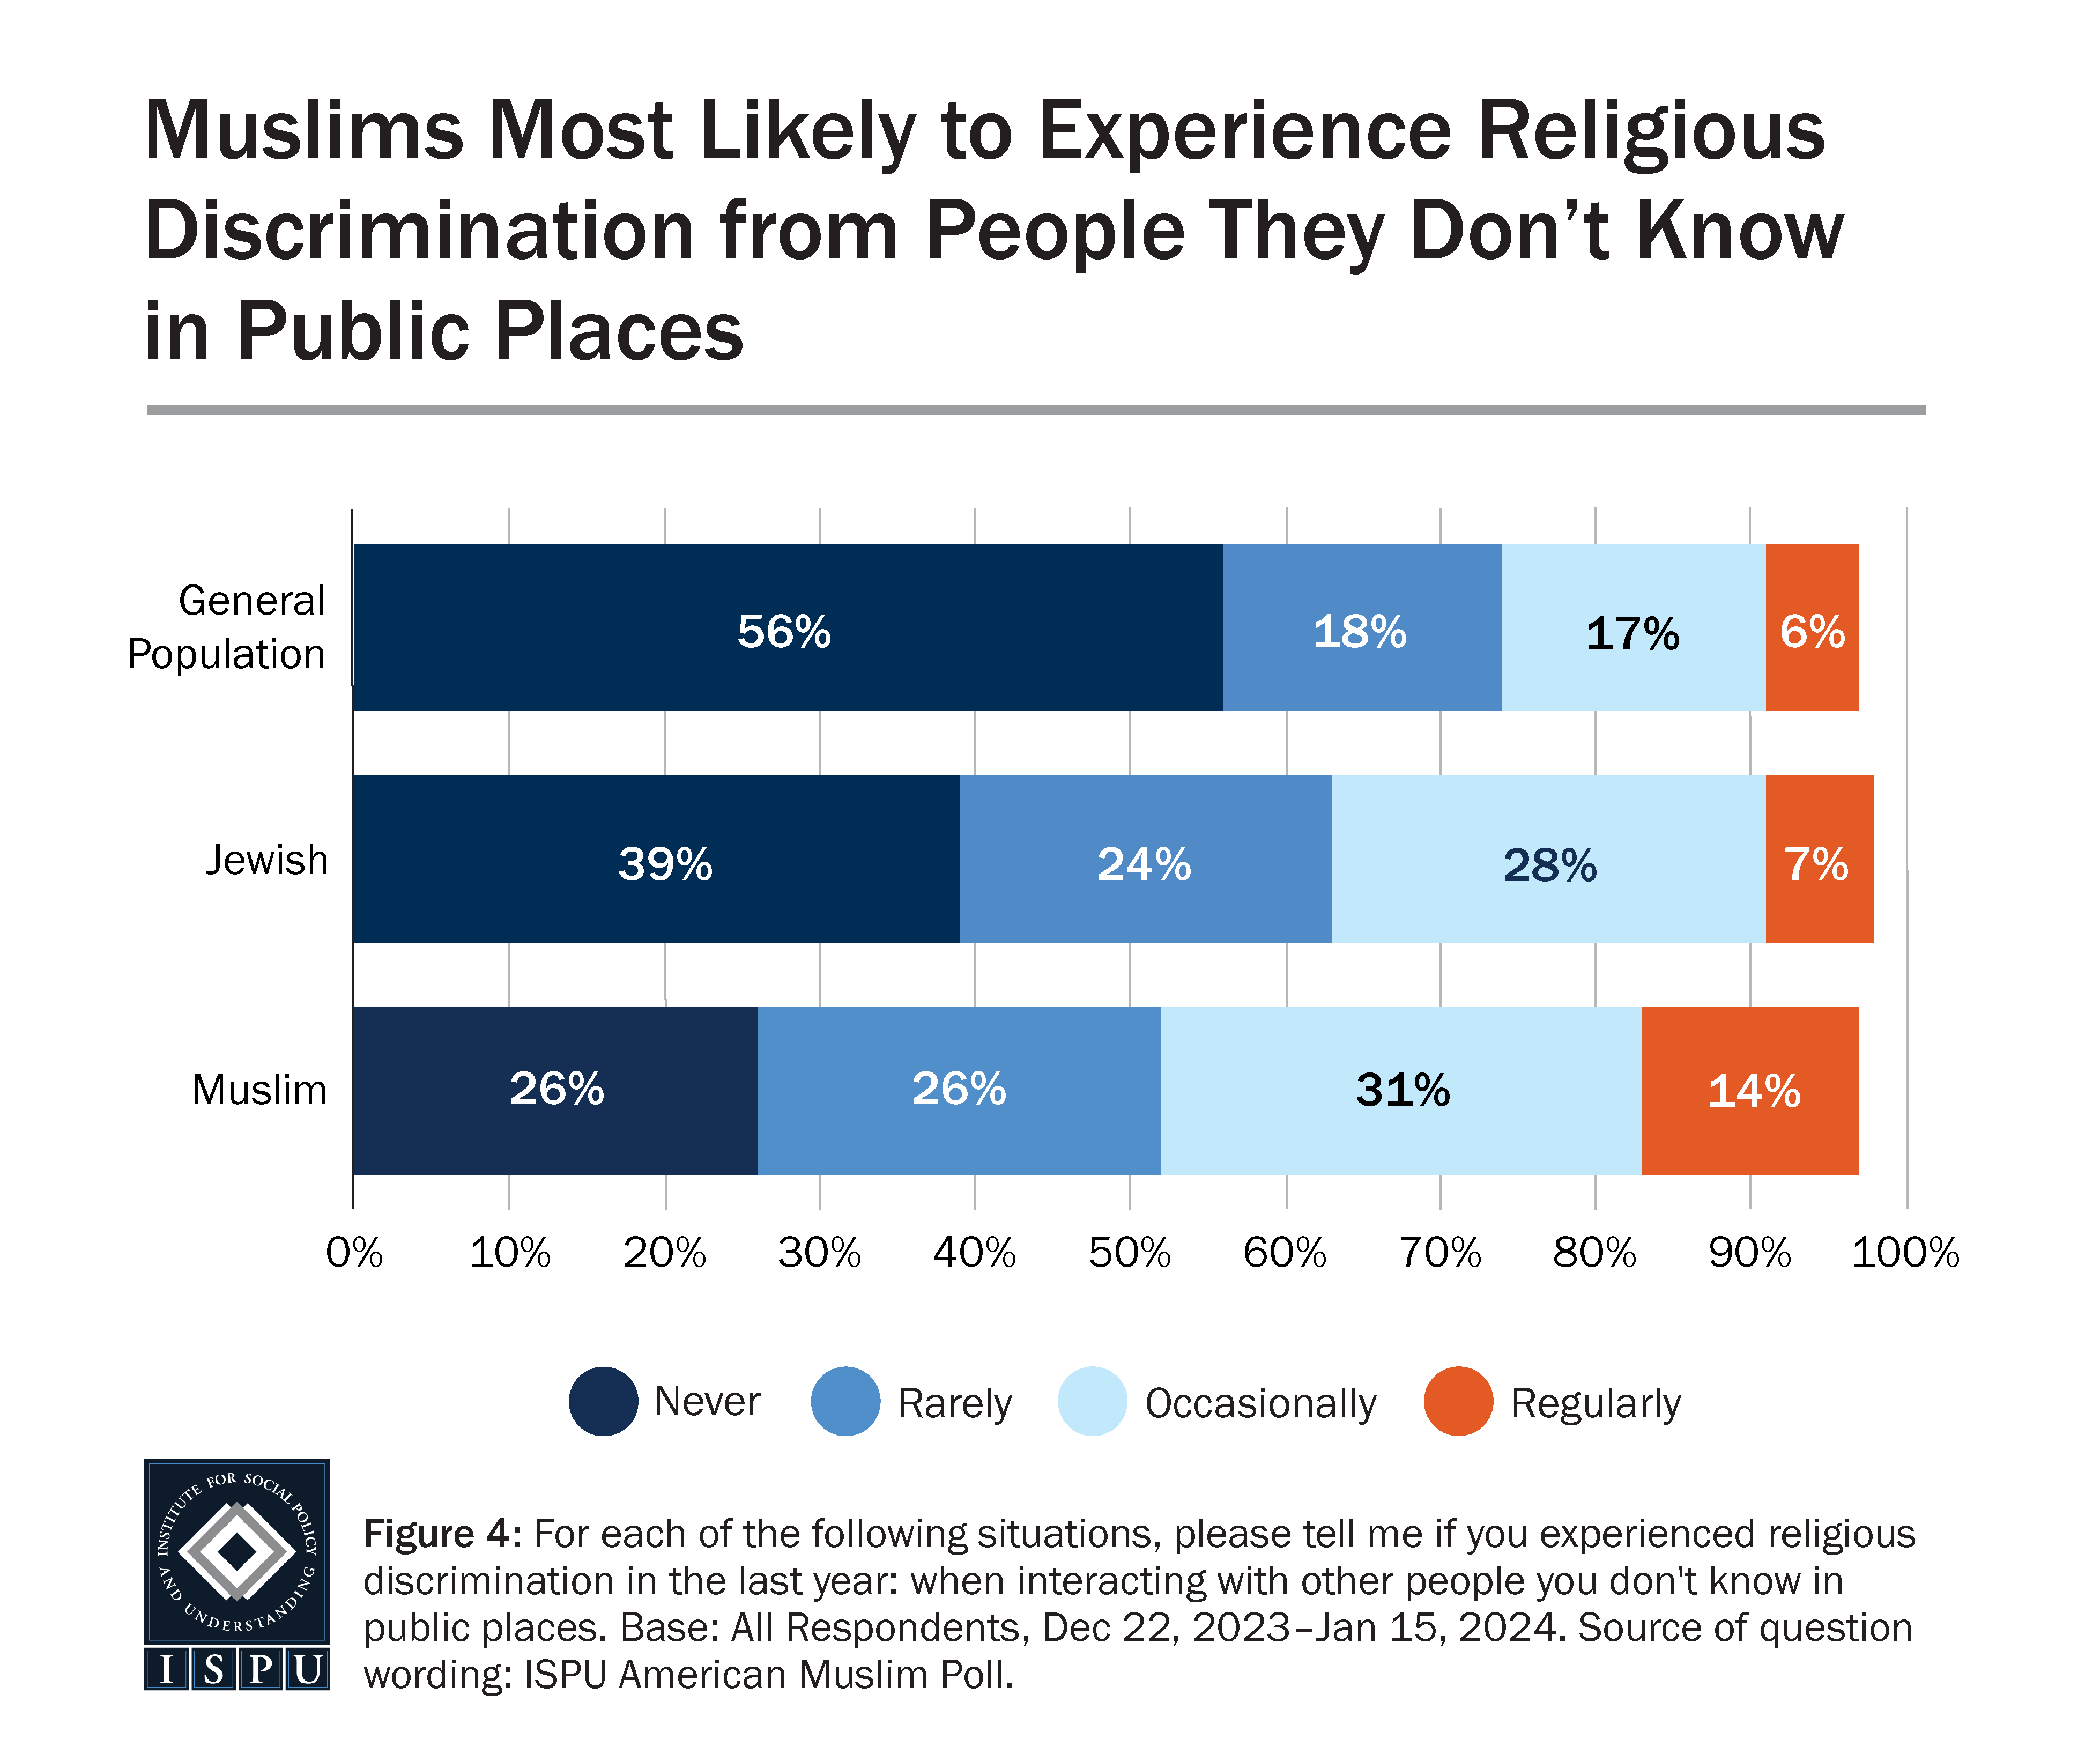 A bar graph showing the frequency of religious discrimination experienced by the general population, Jews, and Muslims when interacting with people in public places.